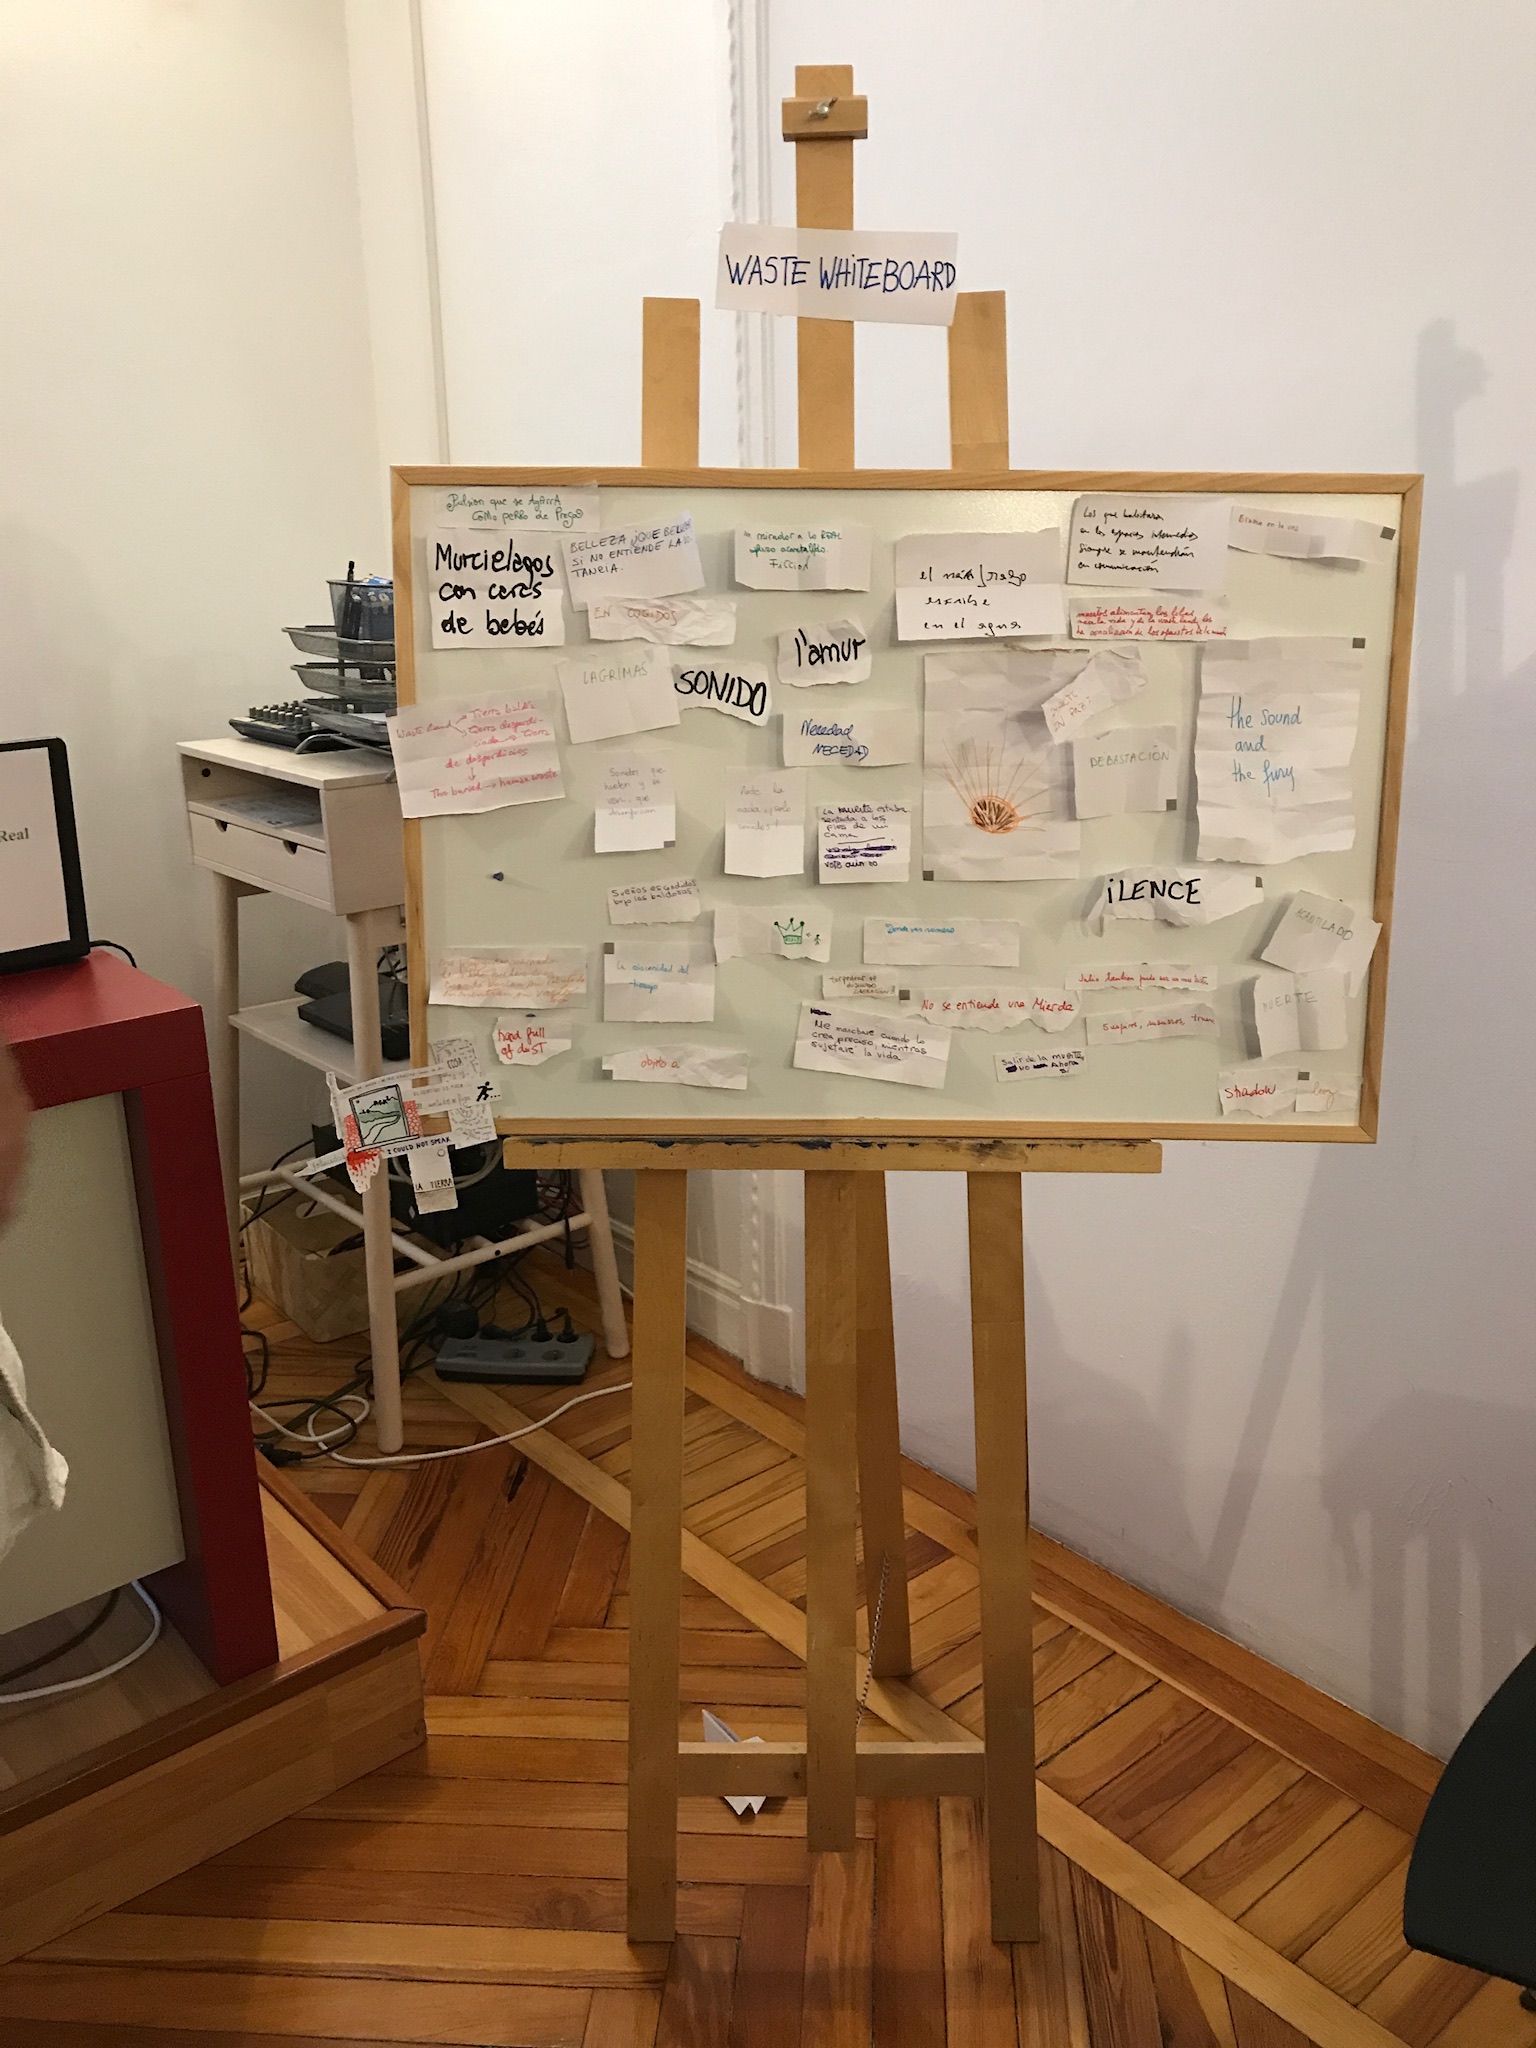 The Waste Whiteboard